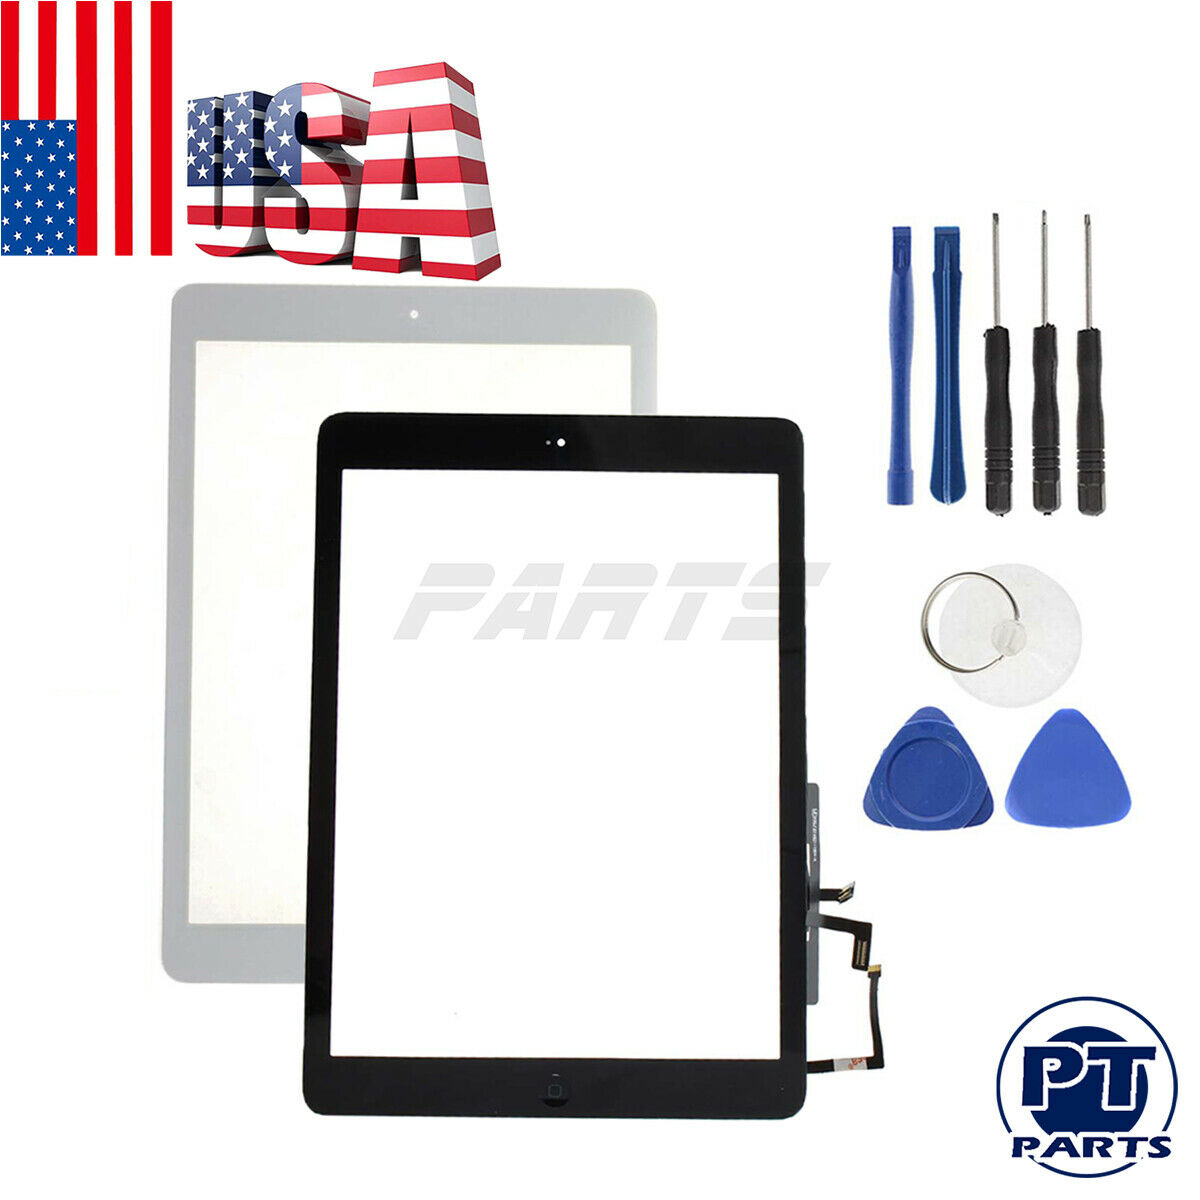 For Ipad Air Screen Replacement 1st A 1474 1475 1476 Touch Digitizer+home Button